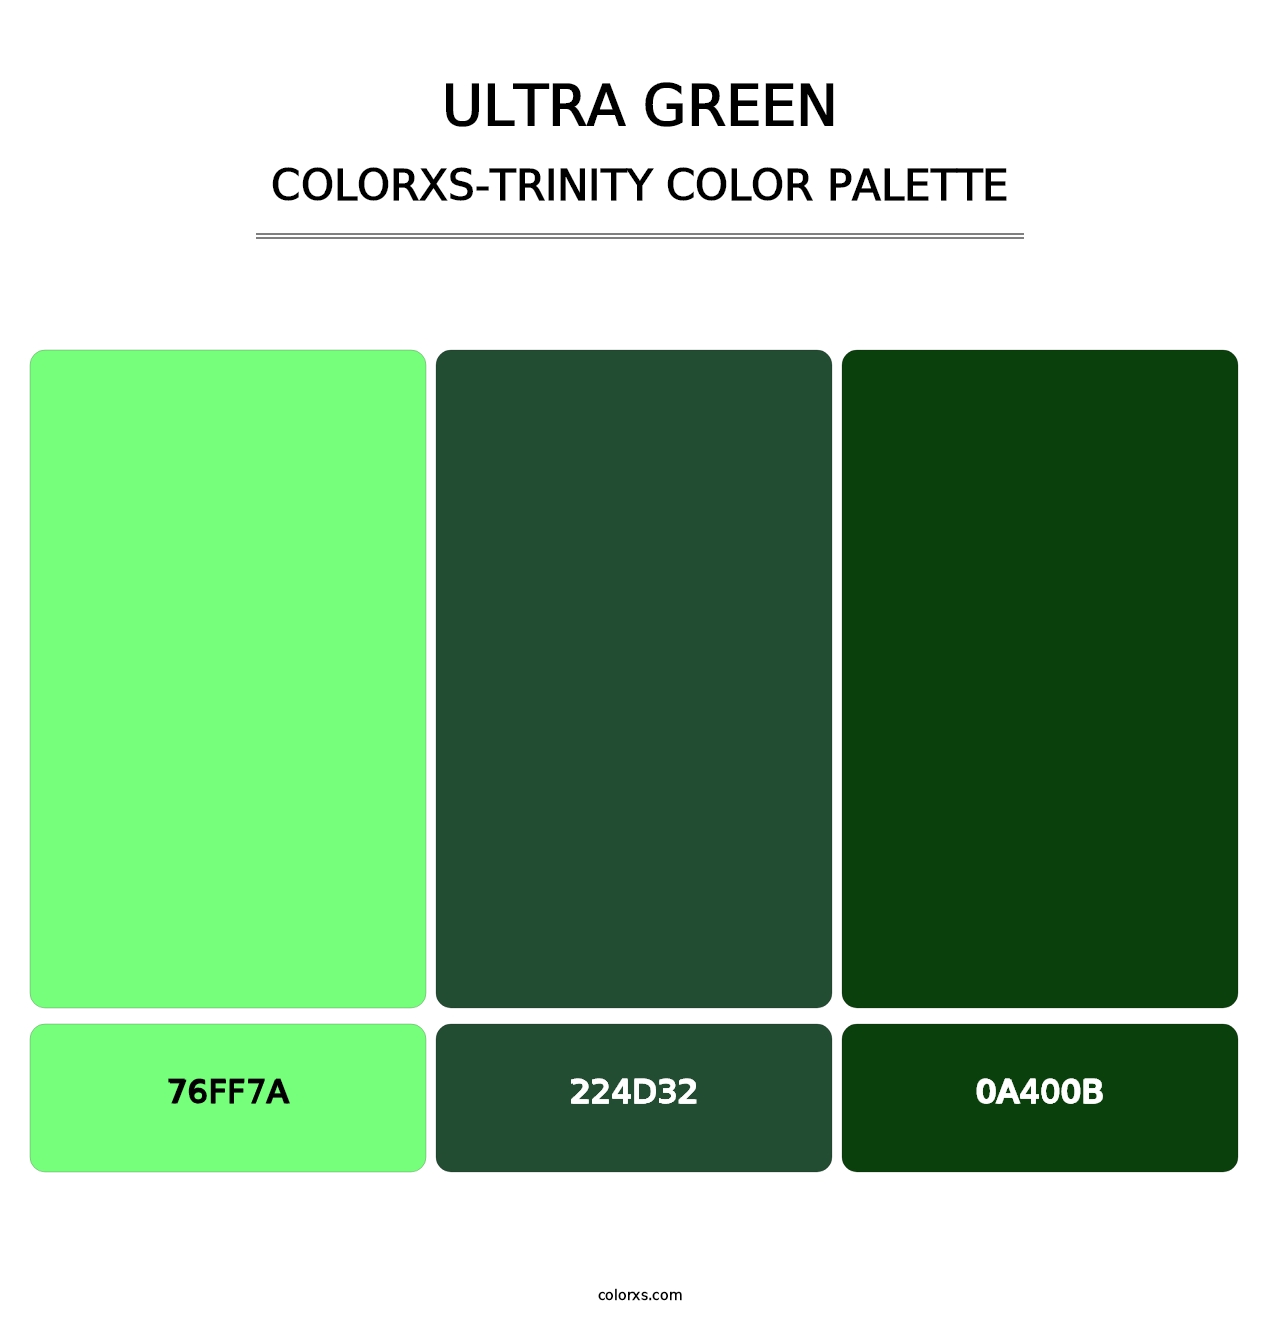 Ultra Green - Colorxs Trinity Palette